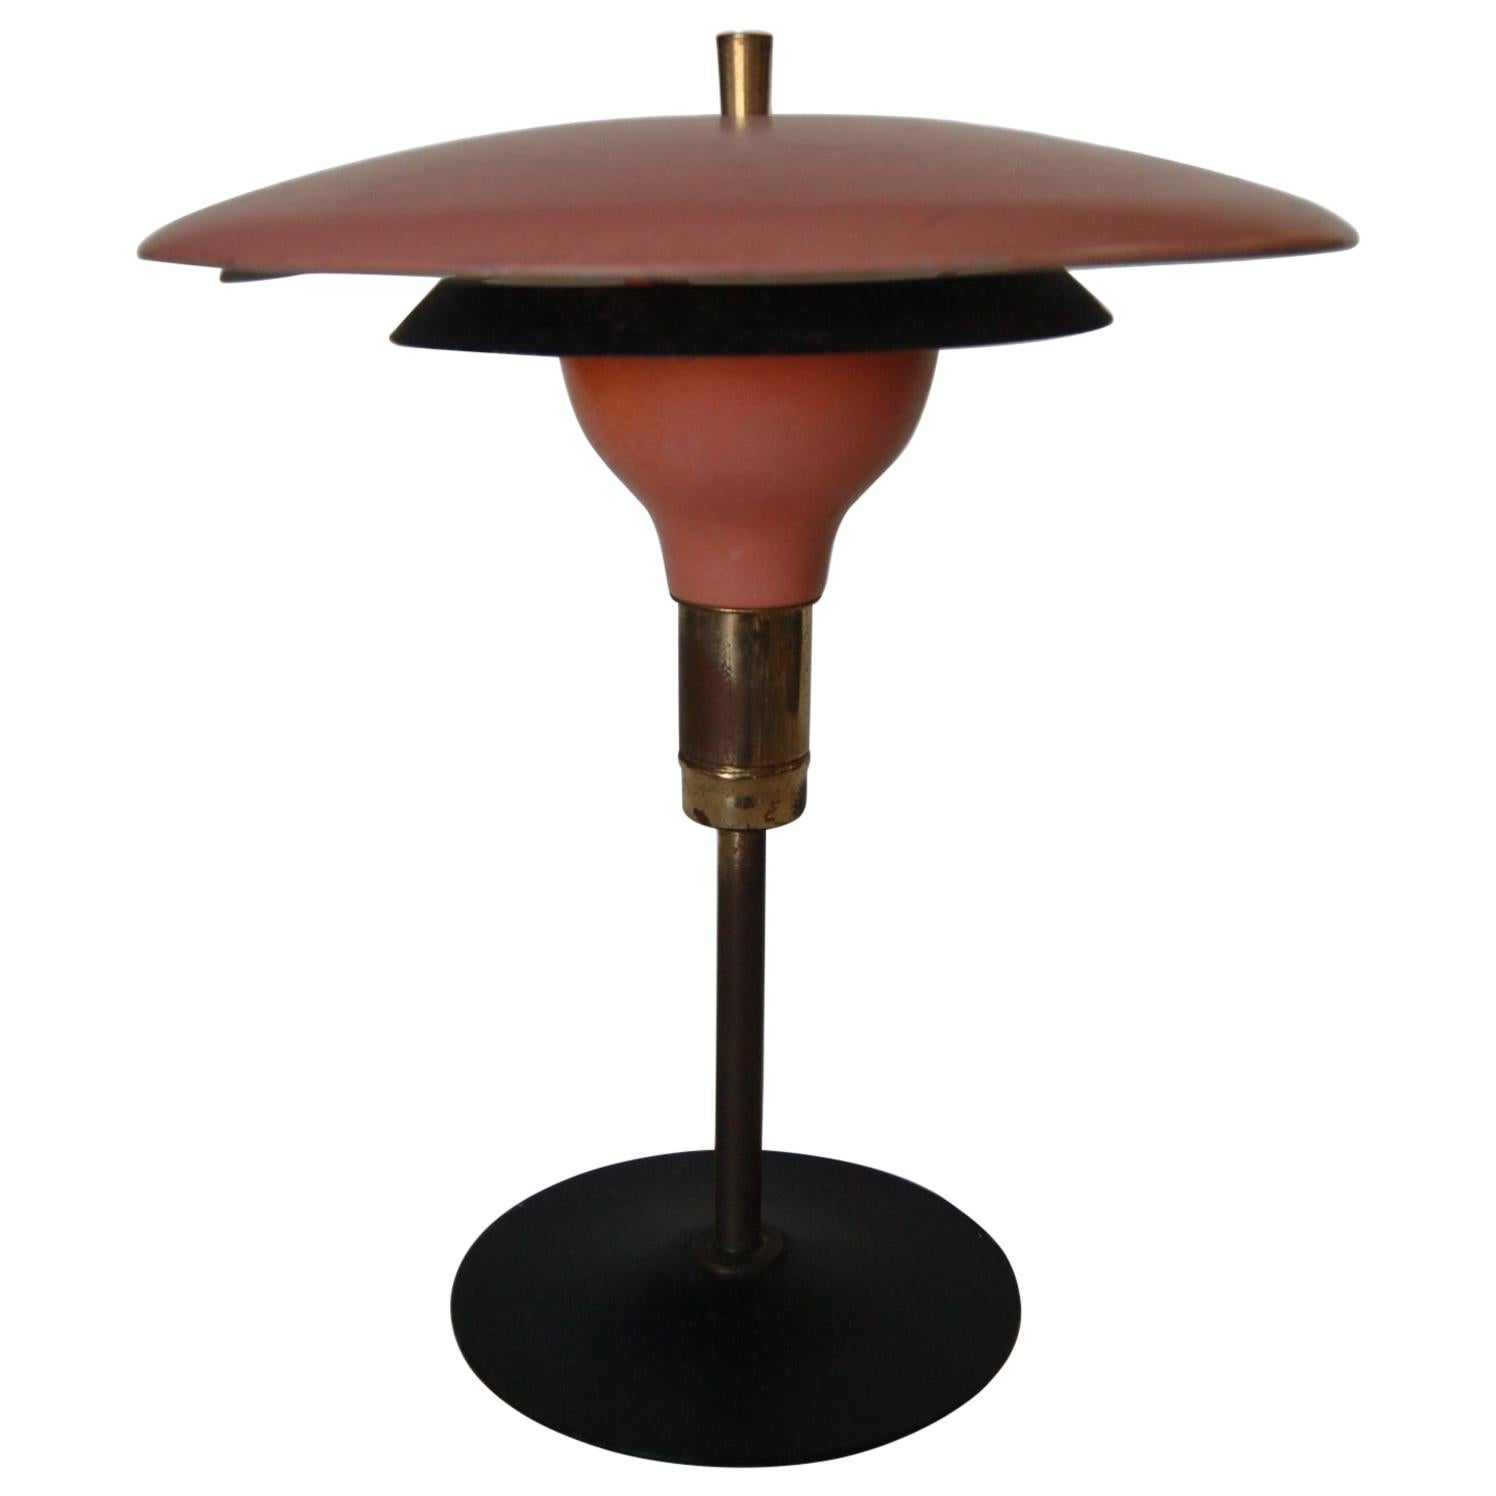 Art Deco Style Pink Saucer Table Lamp with Black and Brass Accents